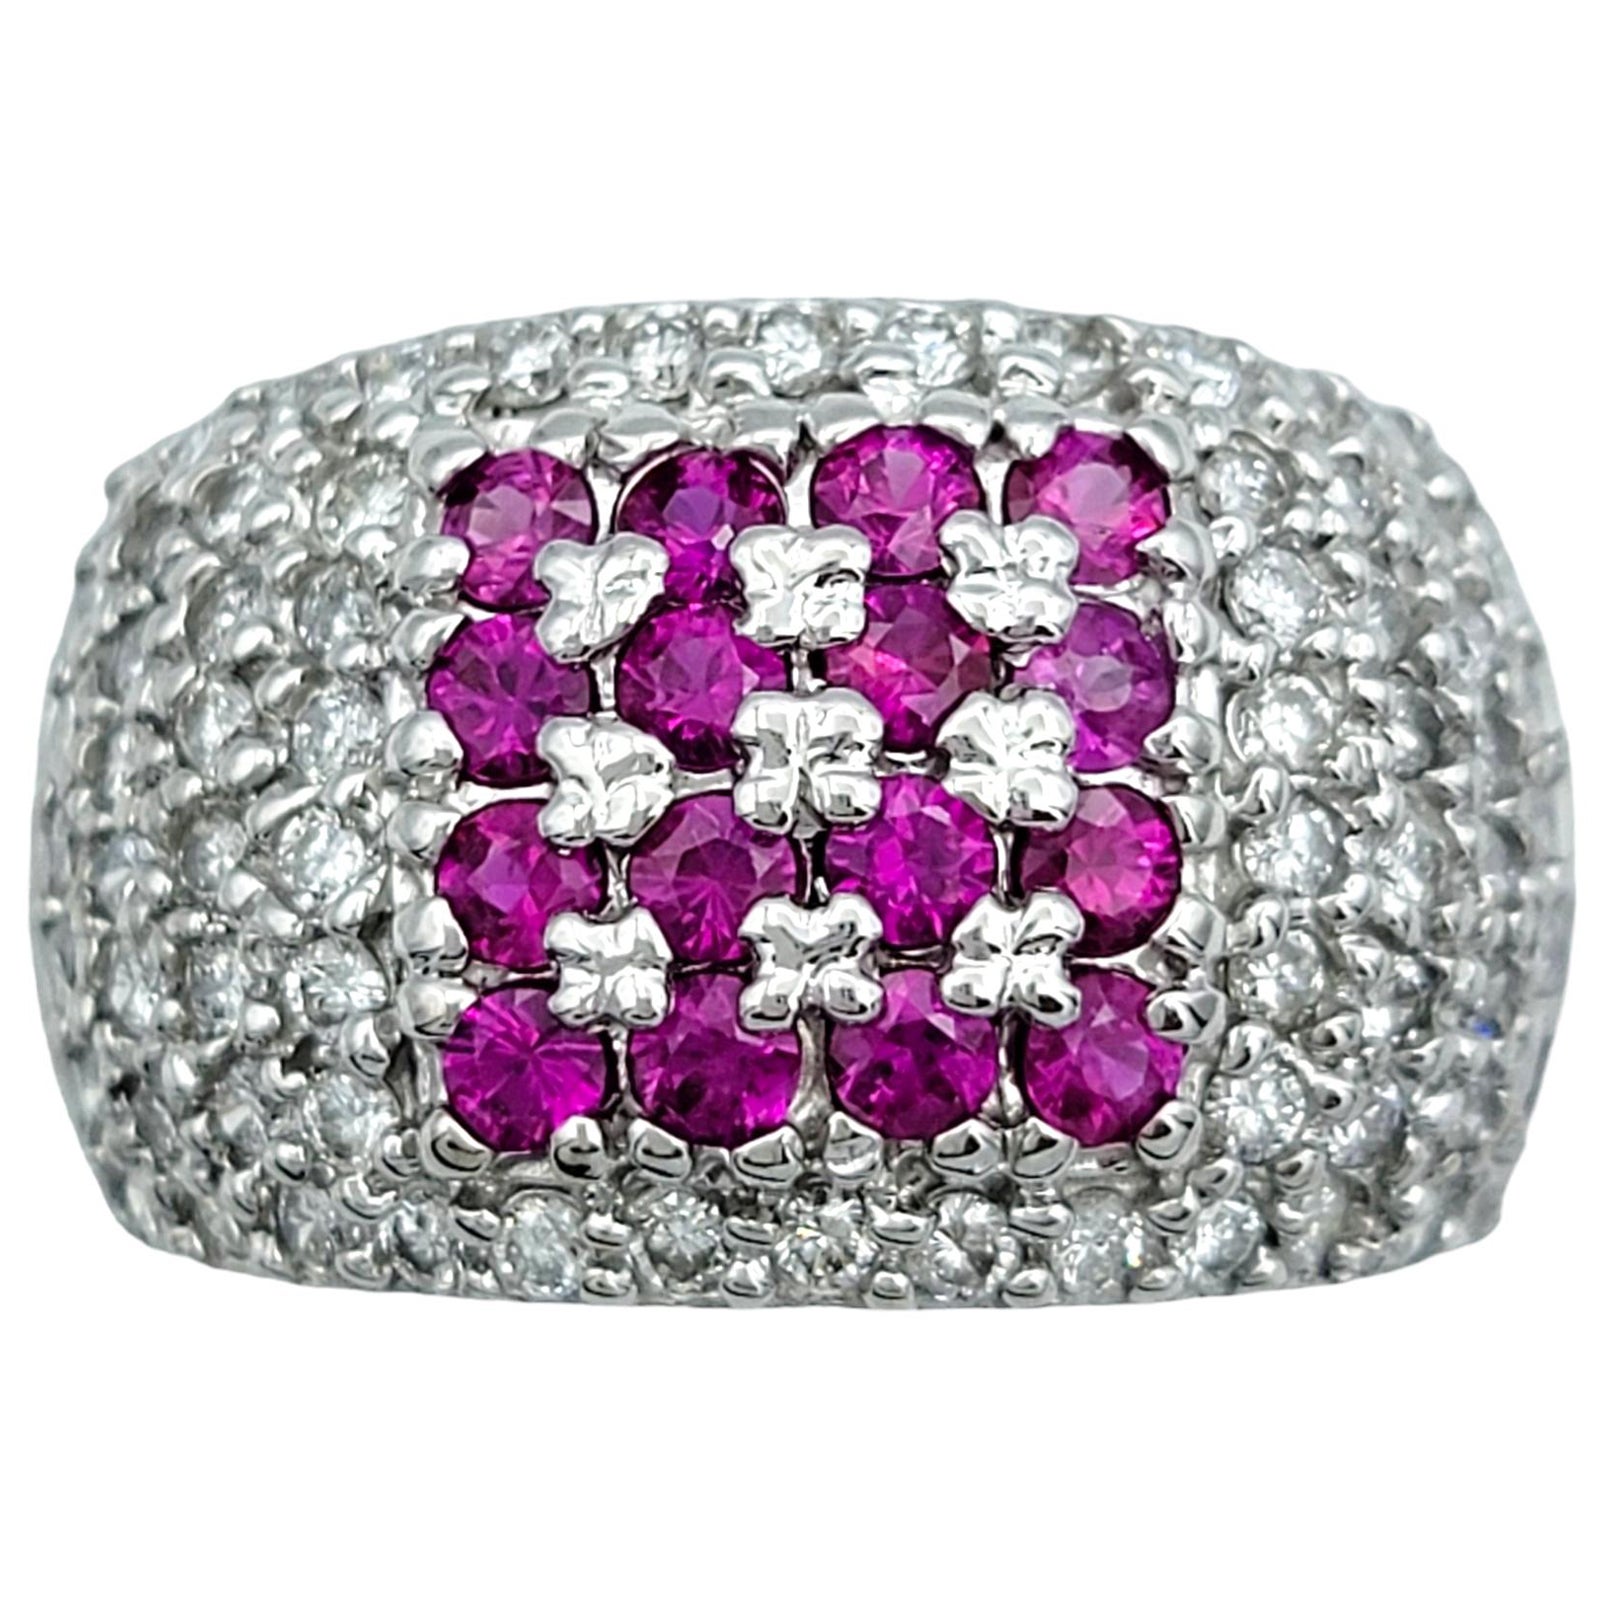 Pink Sapphire and Pavé Diamond Wide Band Ring Set in 14 Karat White Gold